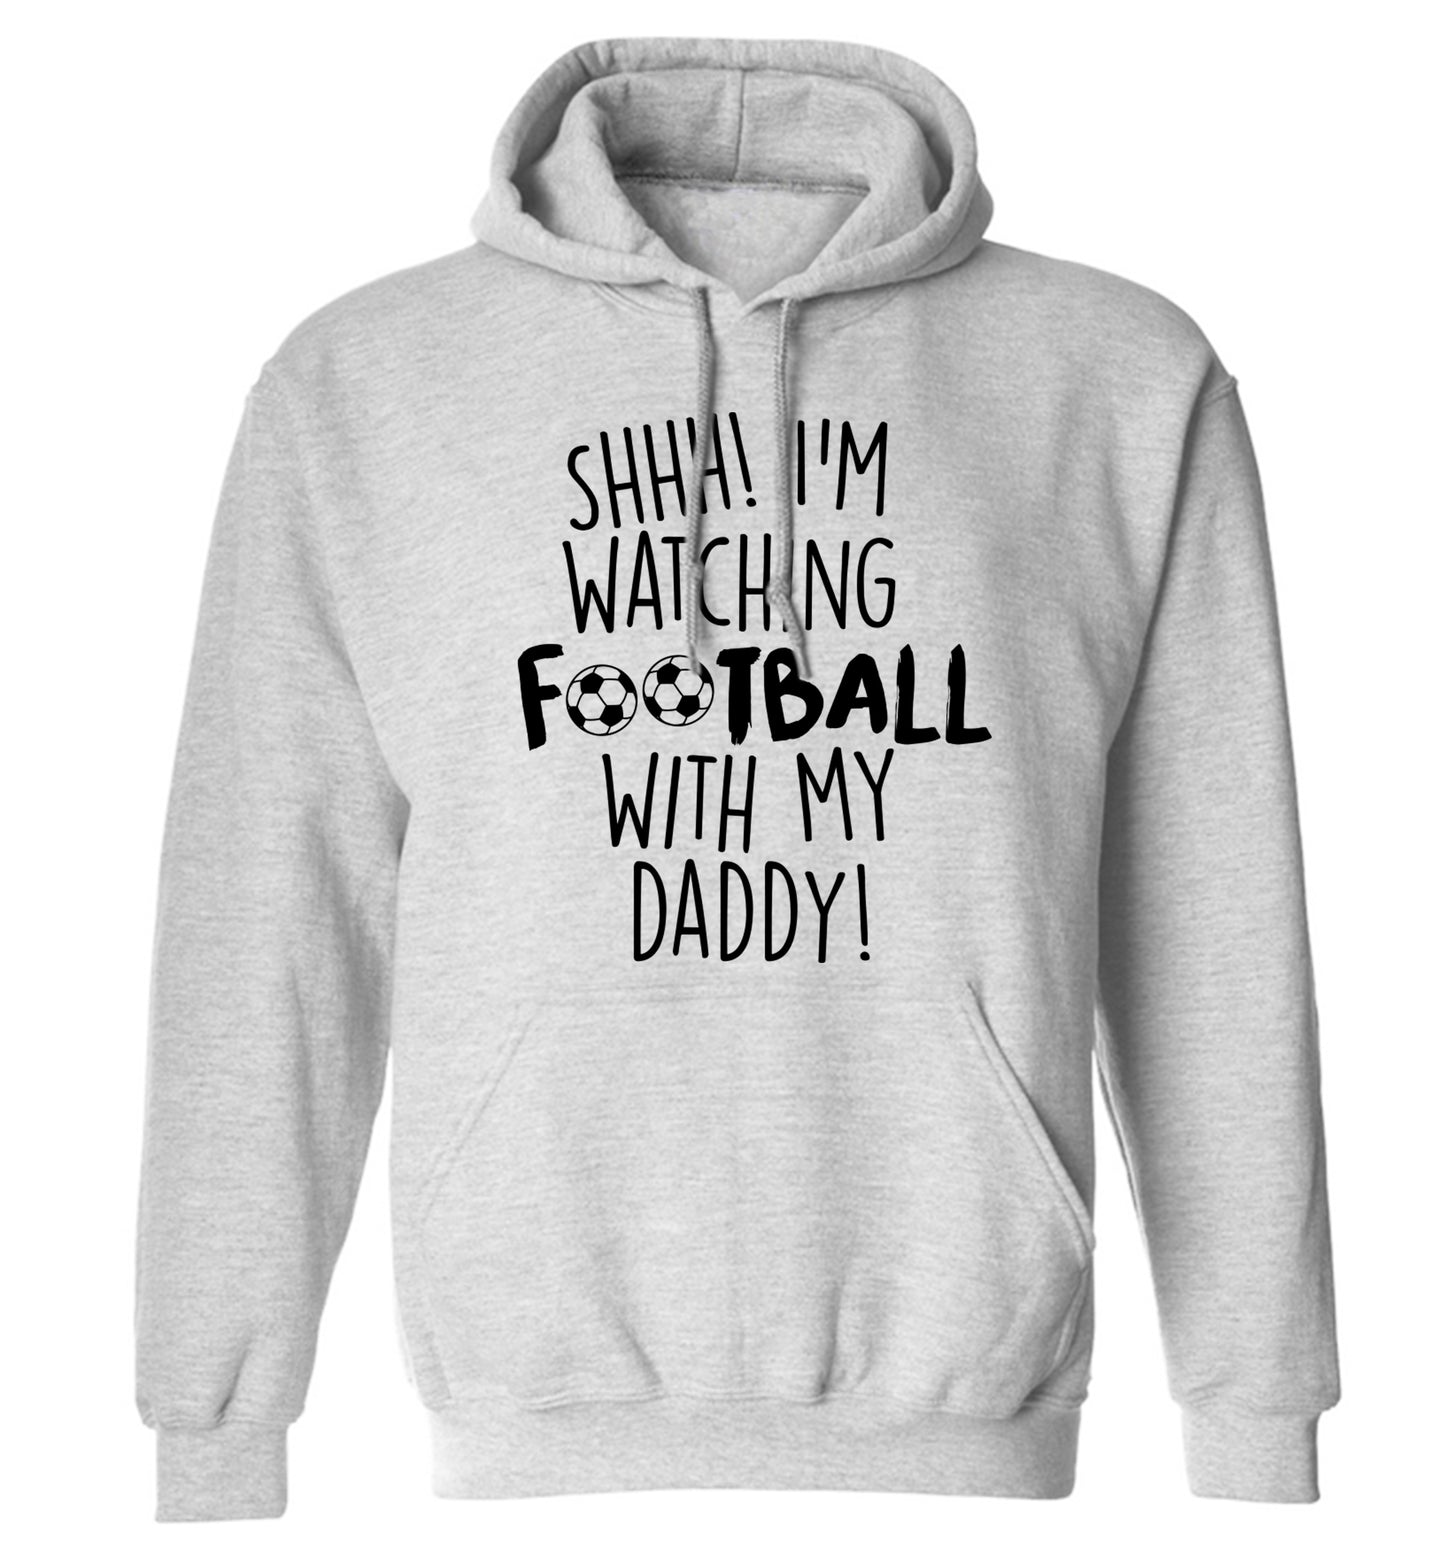 Shhh I'm watching football with my daddy adults unisexgrey hoodie 2XL